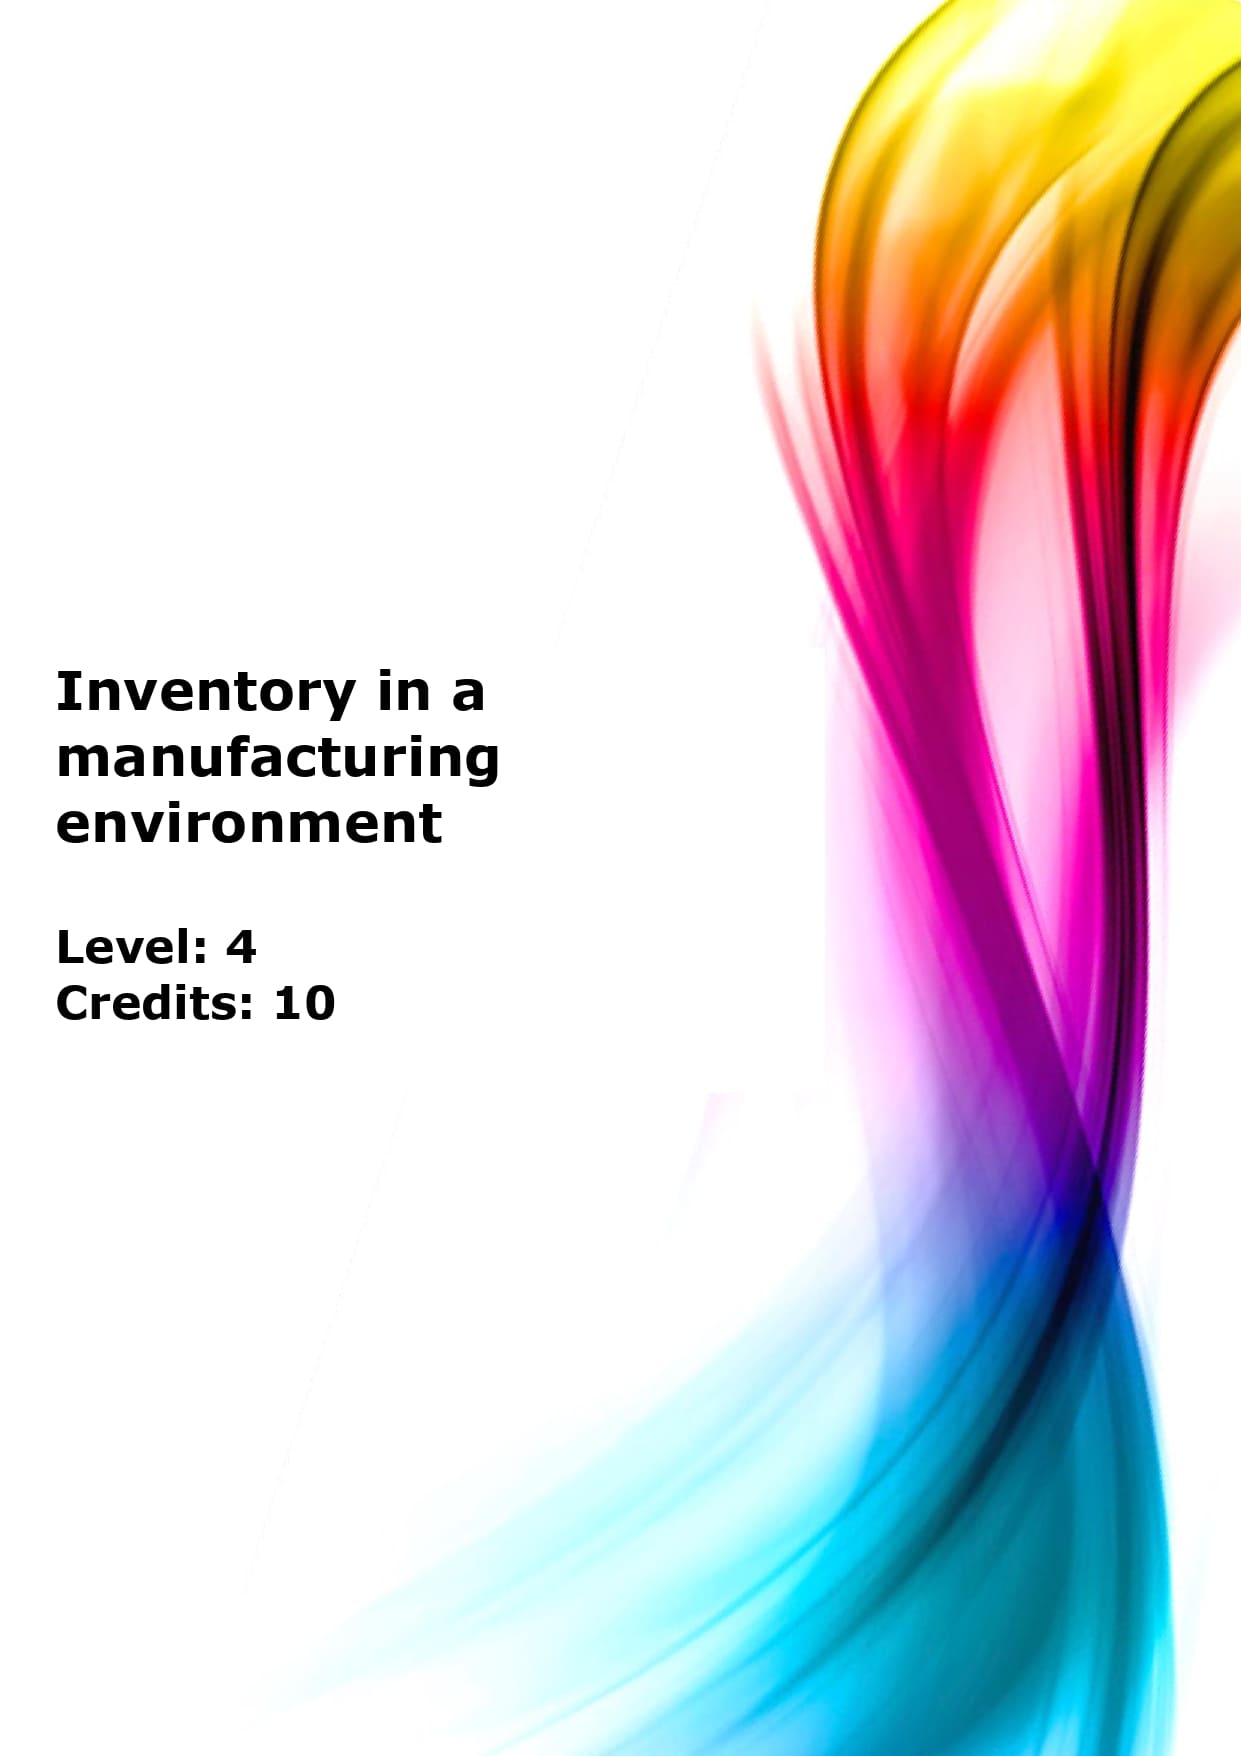 Discuss the role of inventory in a manufacturing environment US